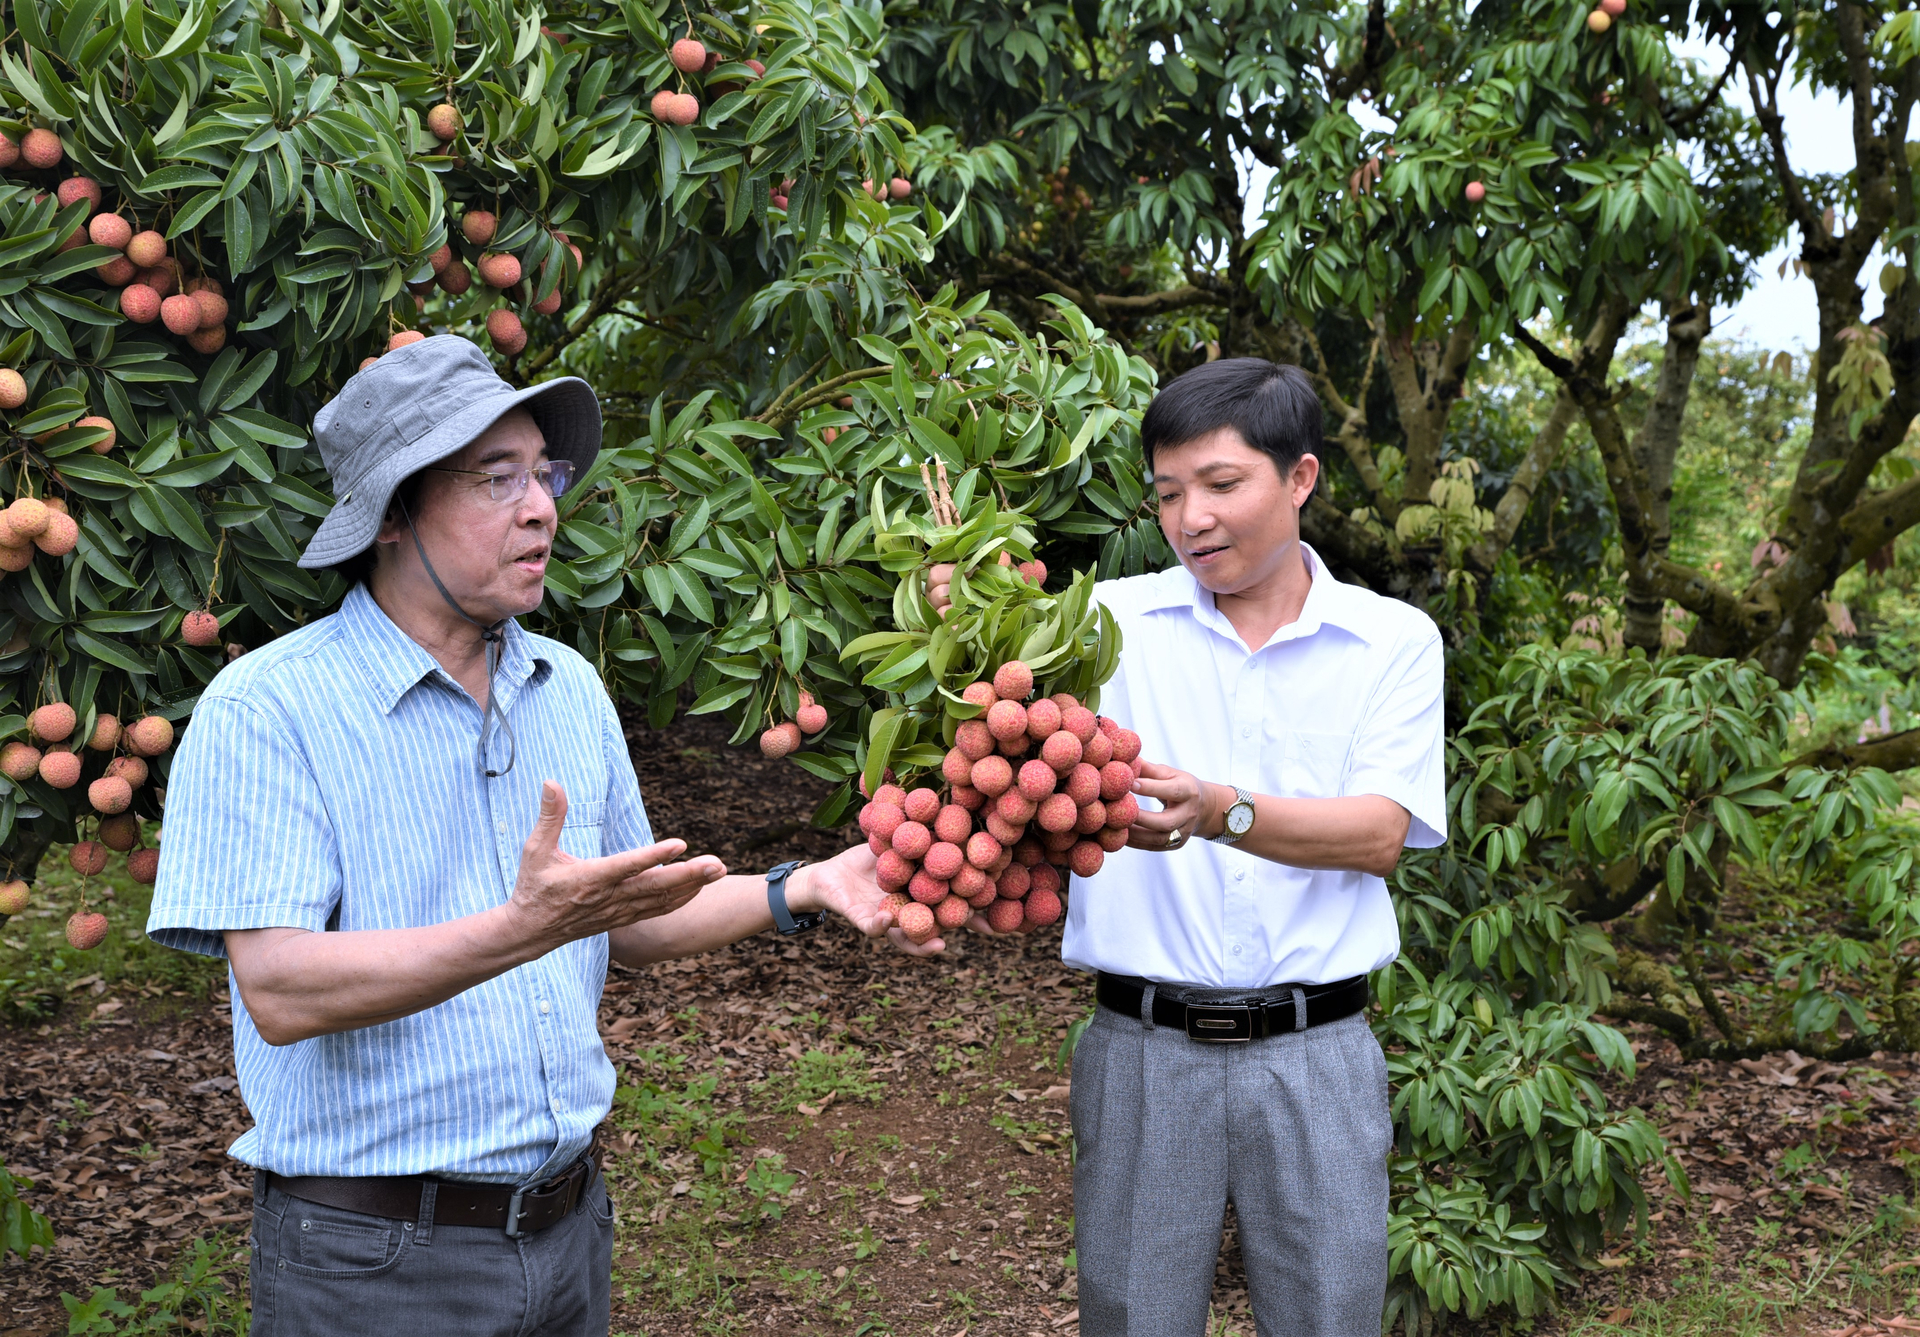 Mr. Dang Van Tang (right), Director of the Bac Giang province's Sub-Department of Crop Production and Plant Protection, will continue to develop the organic lychee production model. Photo: Pham Hieu.